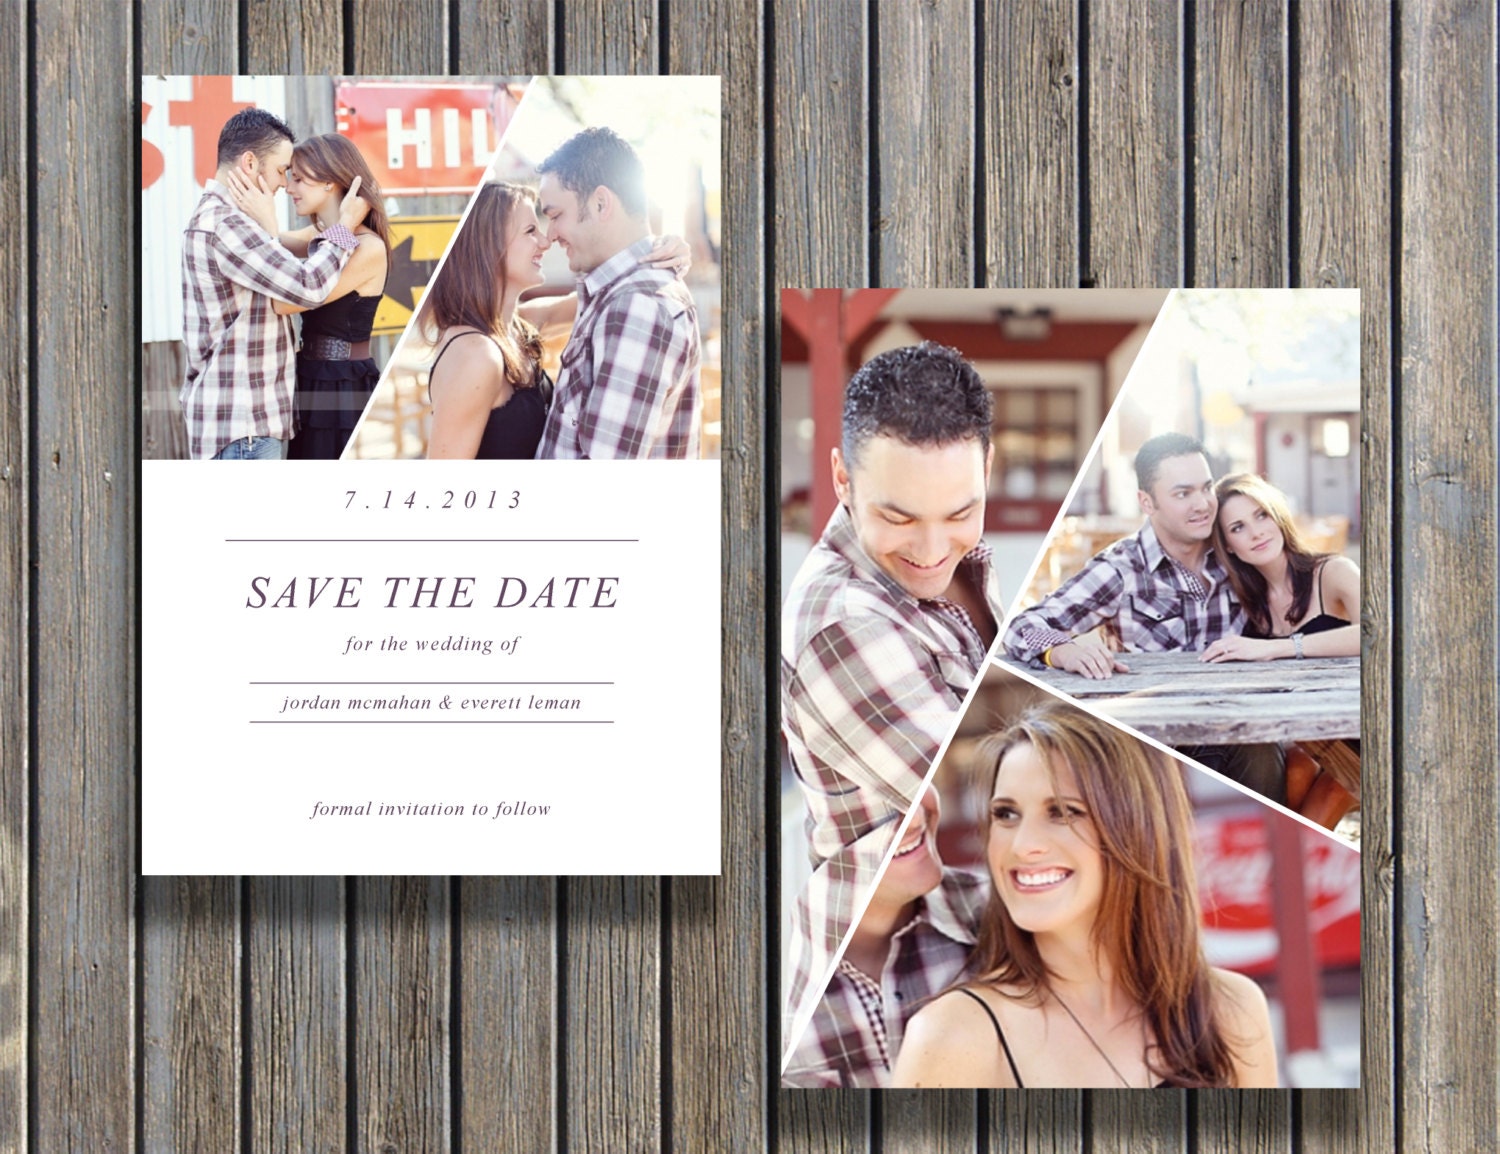 Printable save the date cards   wedding clipart